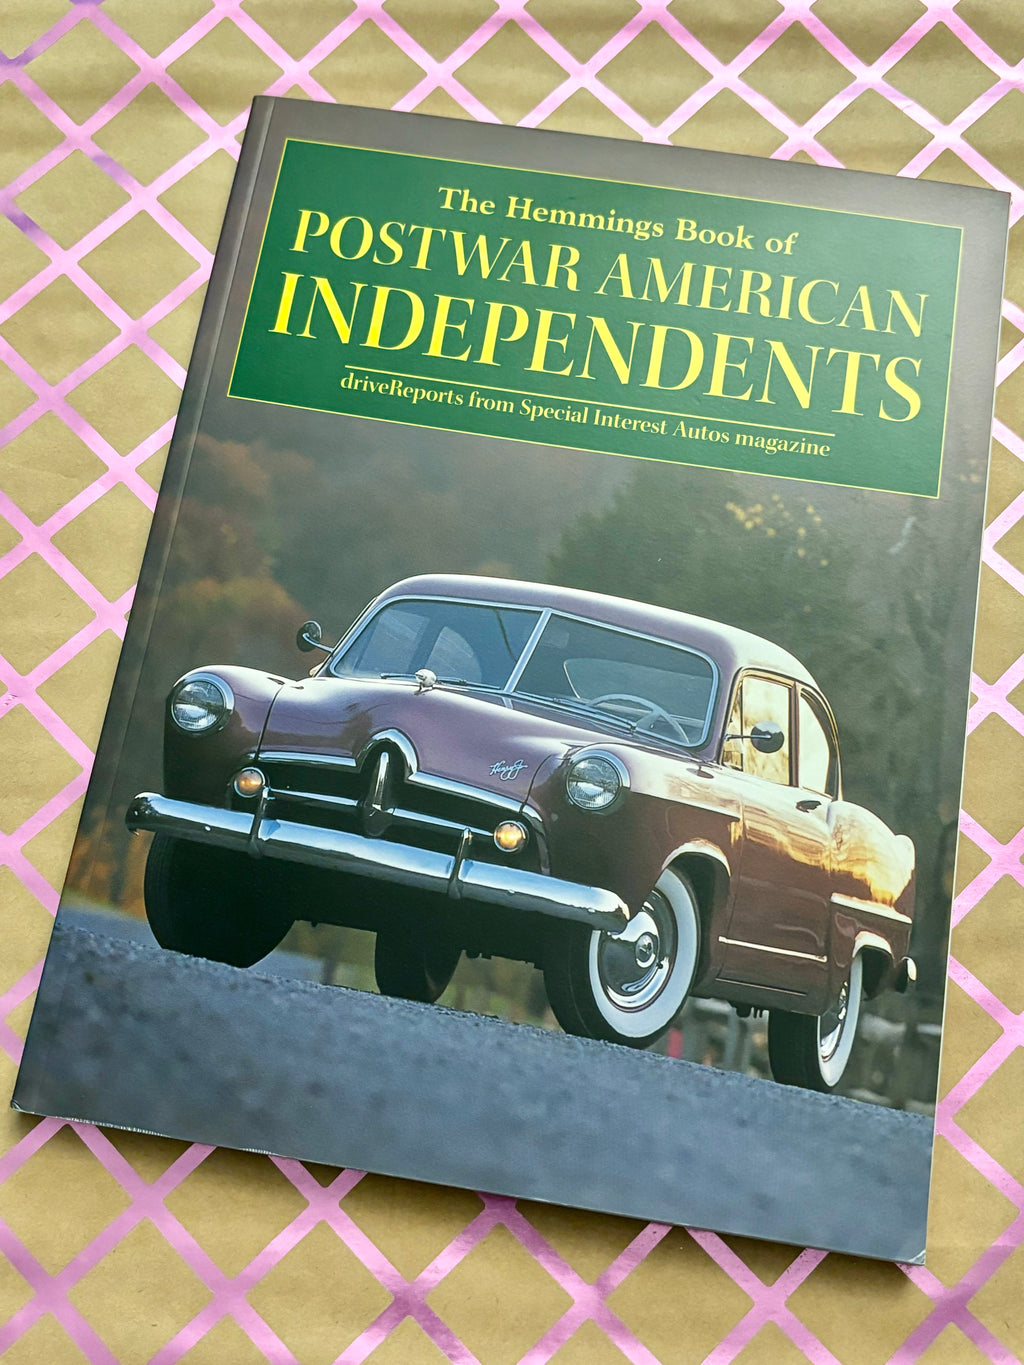 The Hemmings Book of Postwar American Independents: DriveReports from Special Interest Autos Magazine